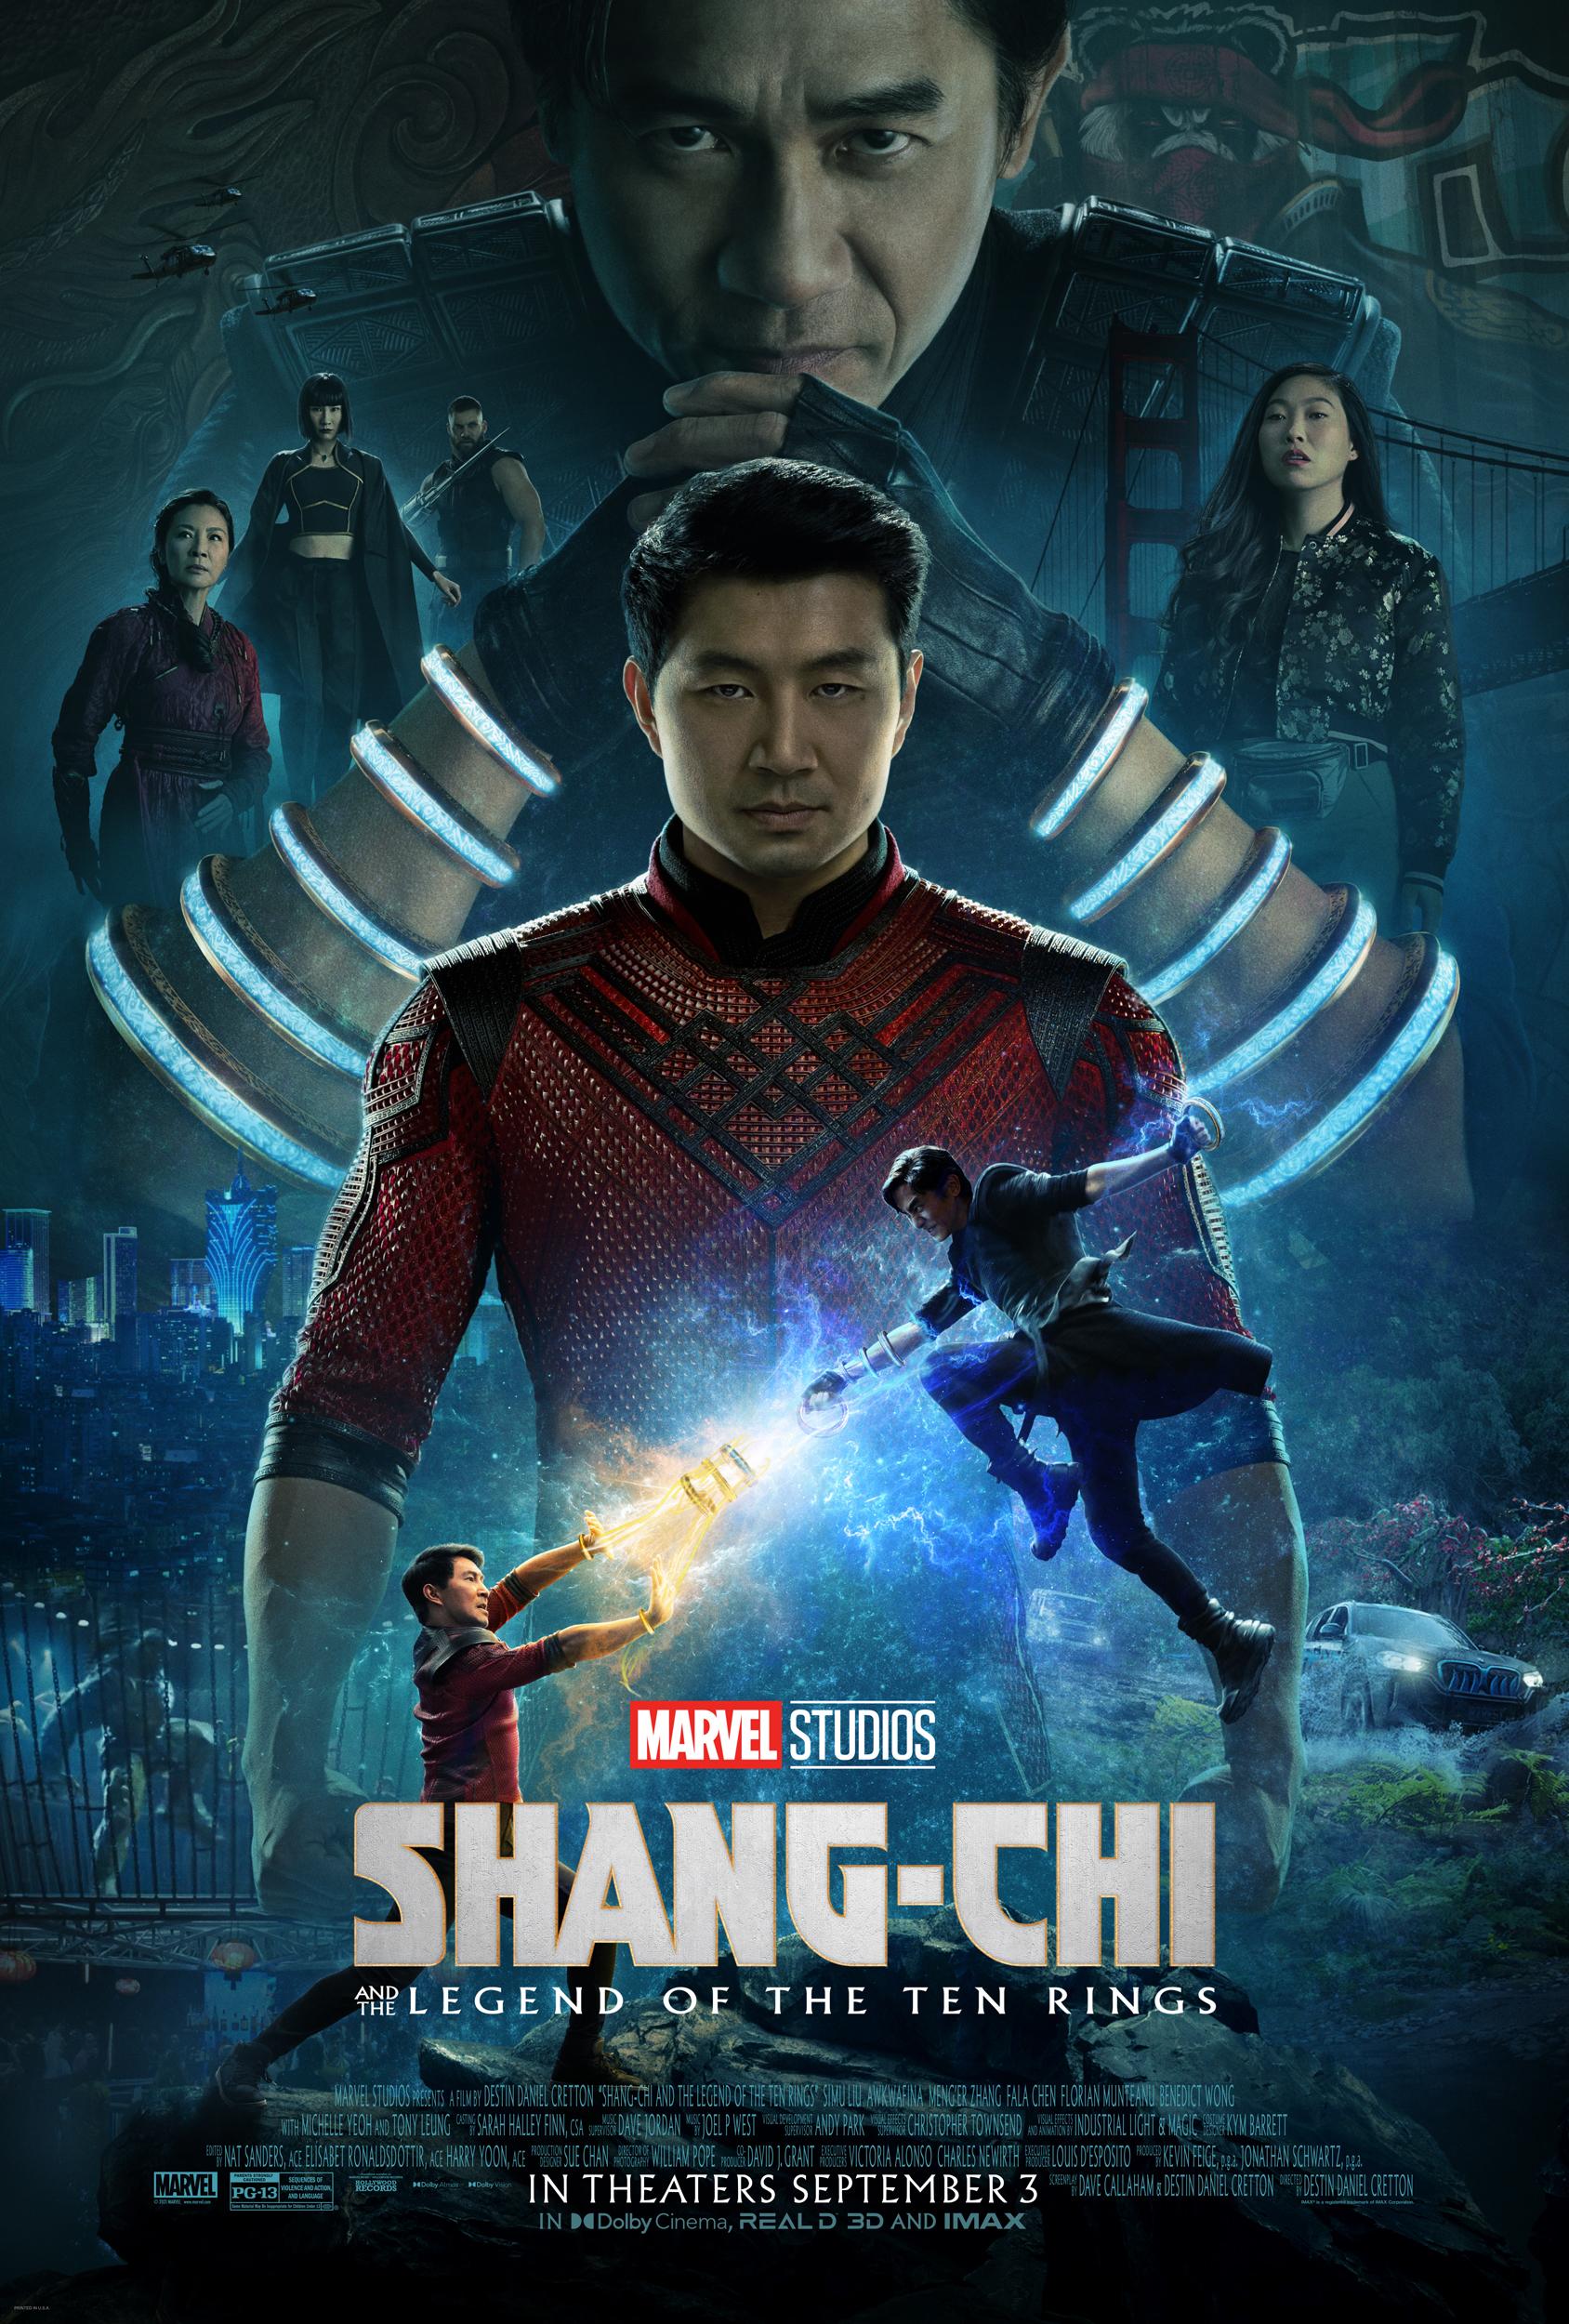 Shang-Chi and the Legend of the Ten Rings (September 3, 2021): This film introduces Shang-Chi, a skilled martial artist who is drawn into the world of the mysterious Ten Rings organization. 